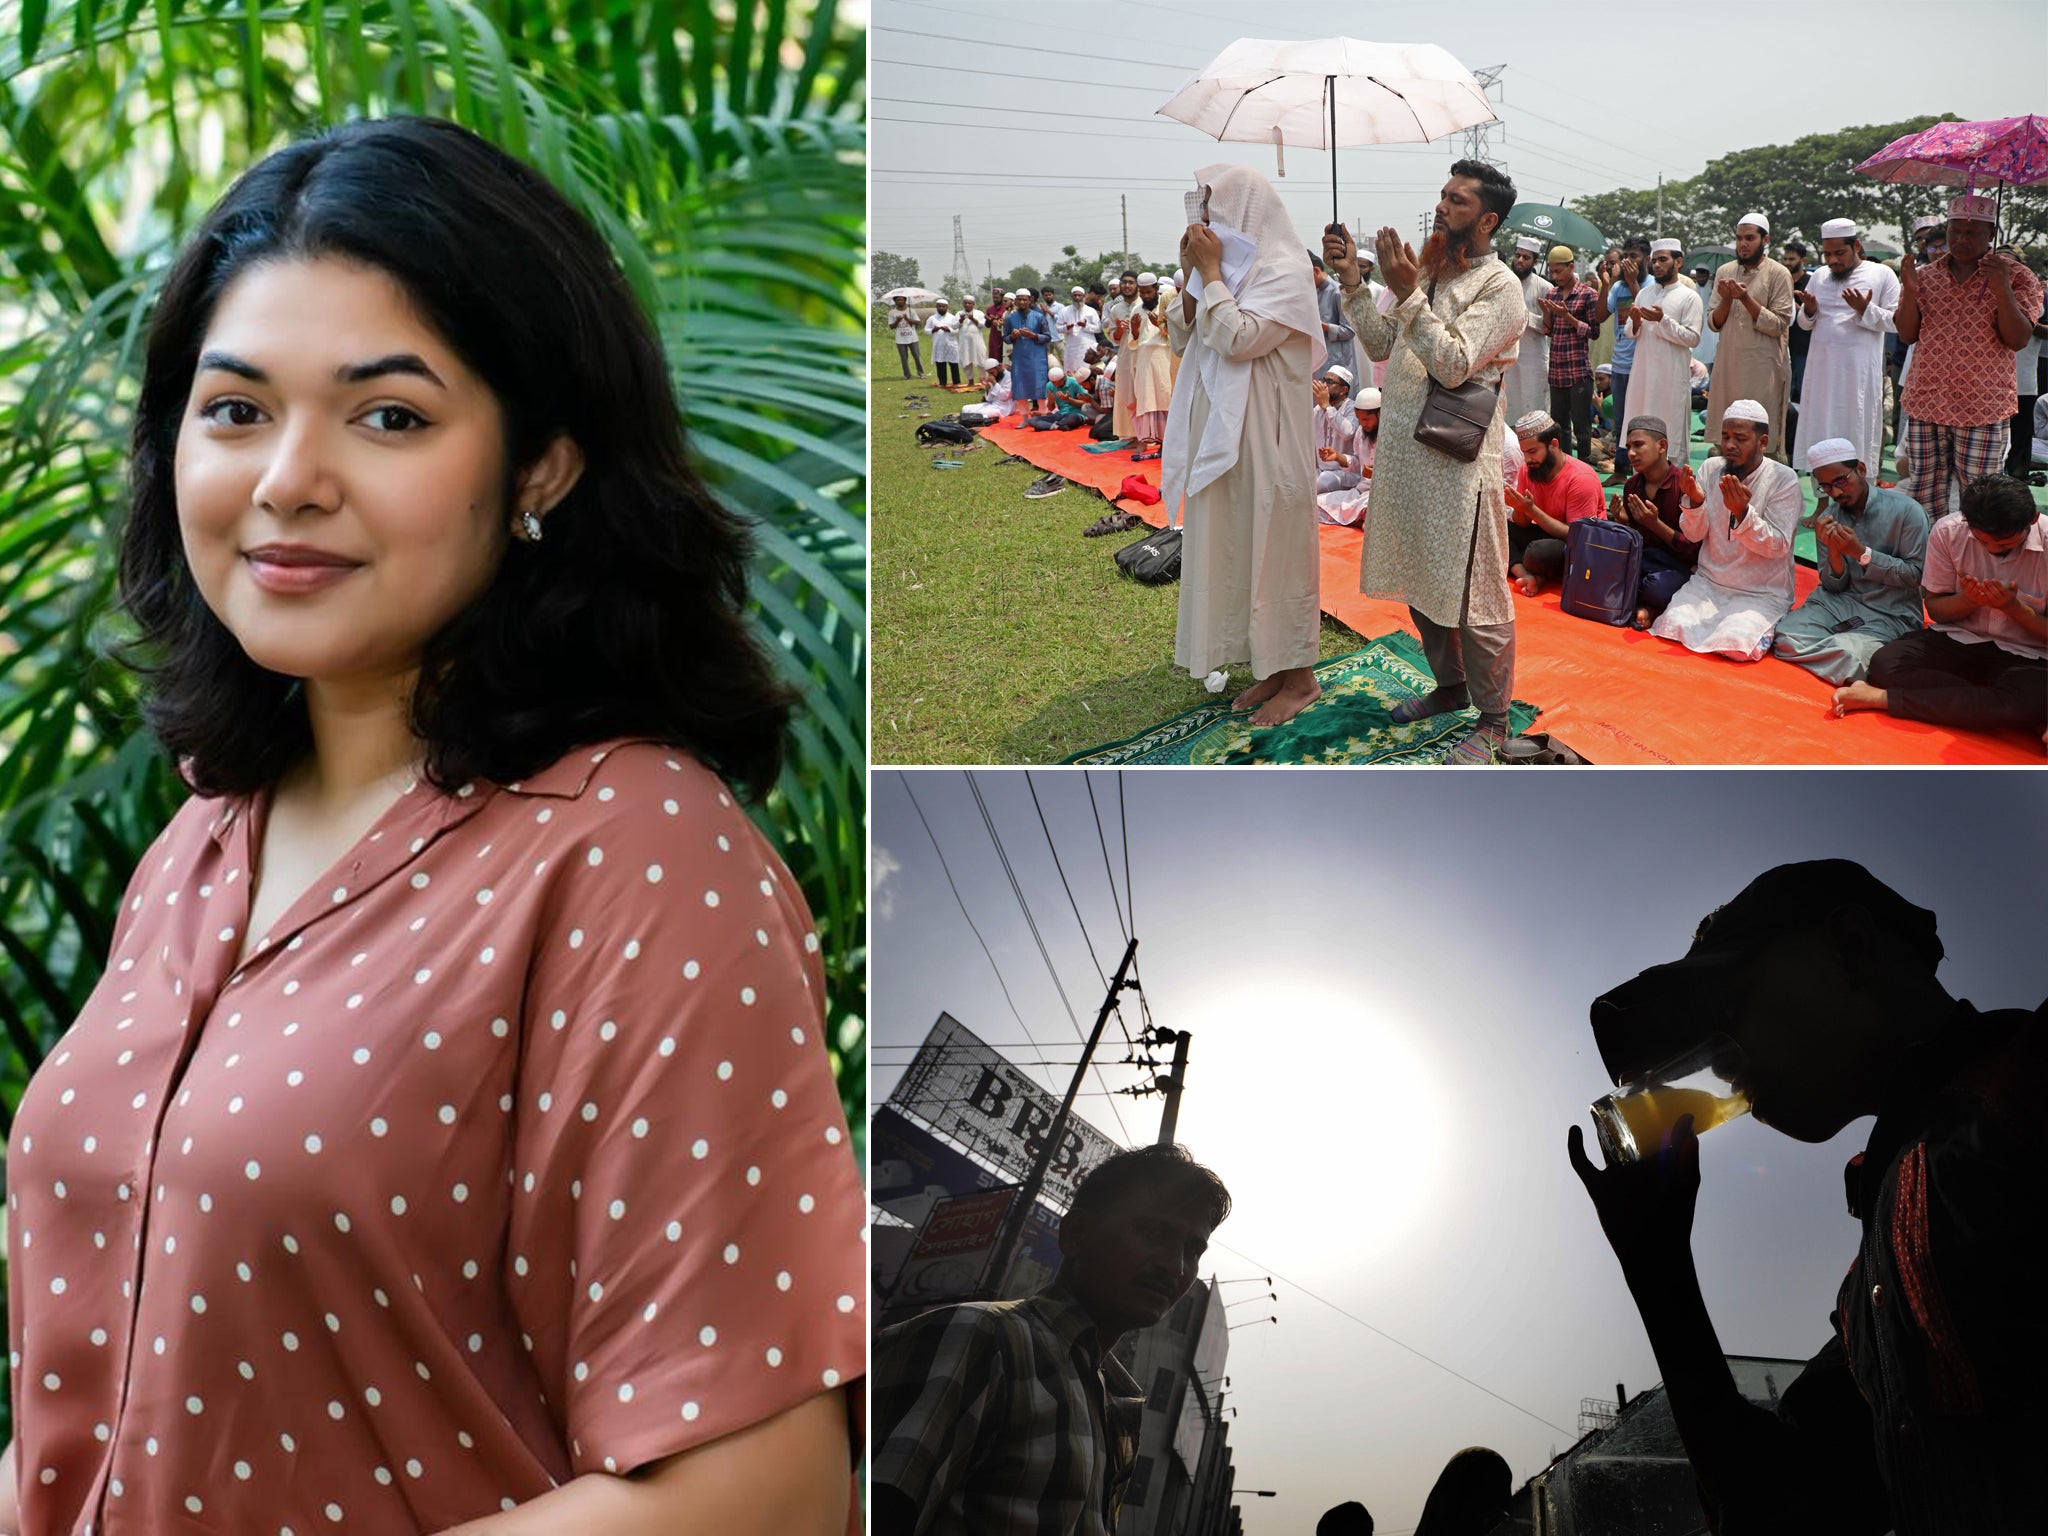 From left, clockwise: Asia’s first chief heat officer Bushra Afreen; Muslims offer special prayers for rains in Dhaka during an April heatwave; a man buys cool drinks from a street vendor amid soaring heat in the city